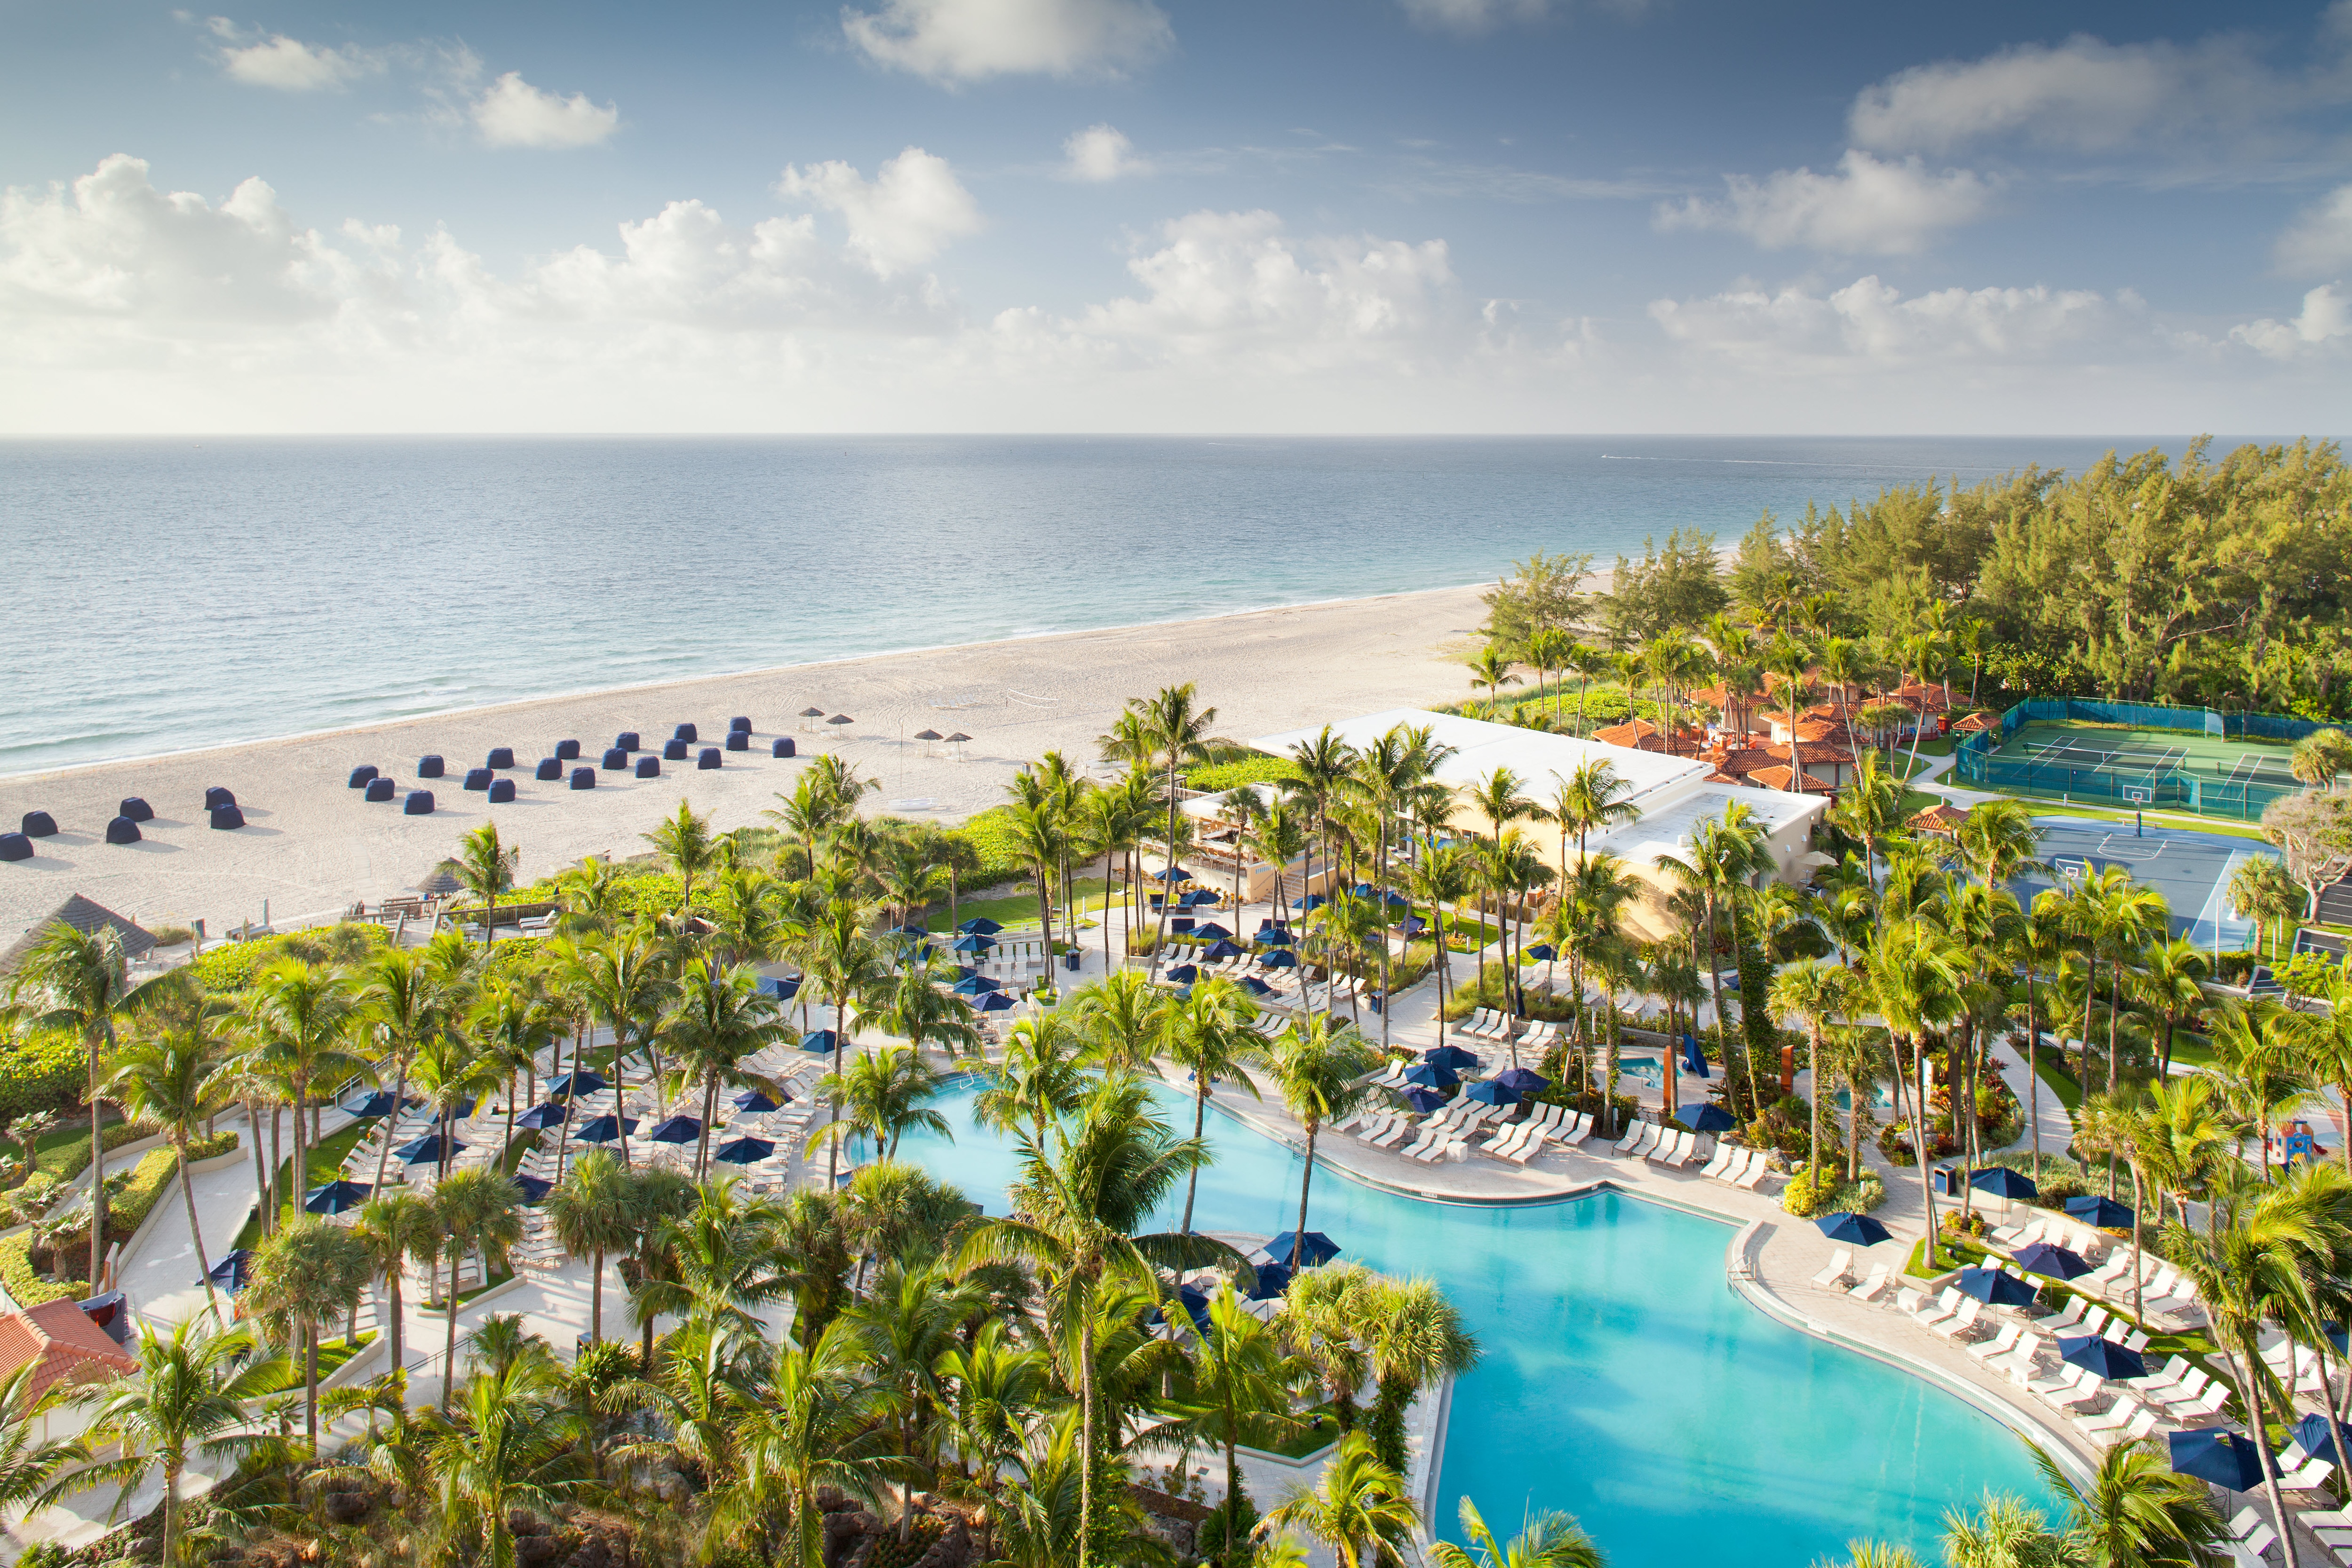 October opening possible for Coco Reef Resort and Spa